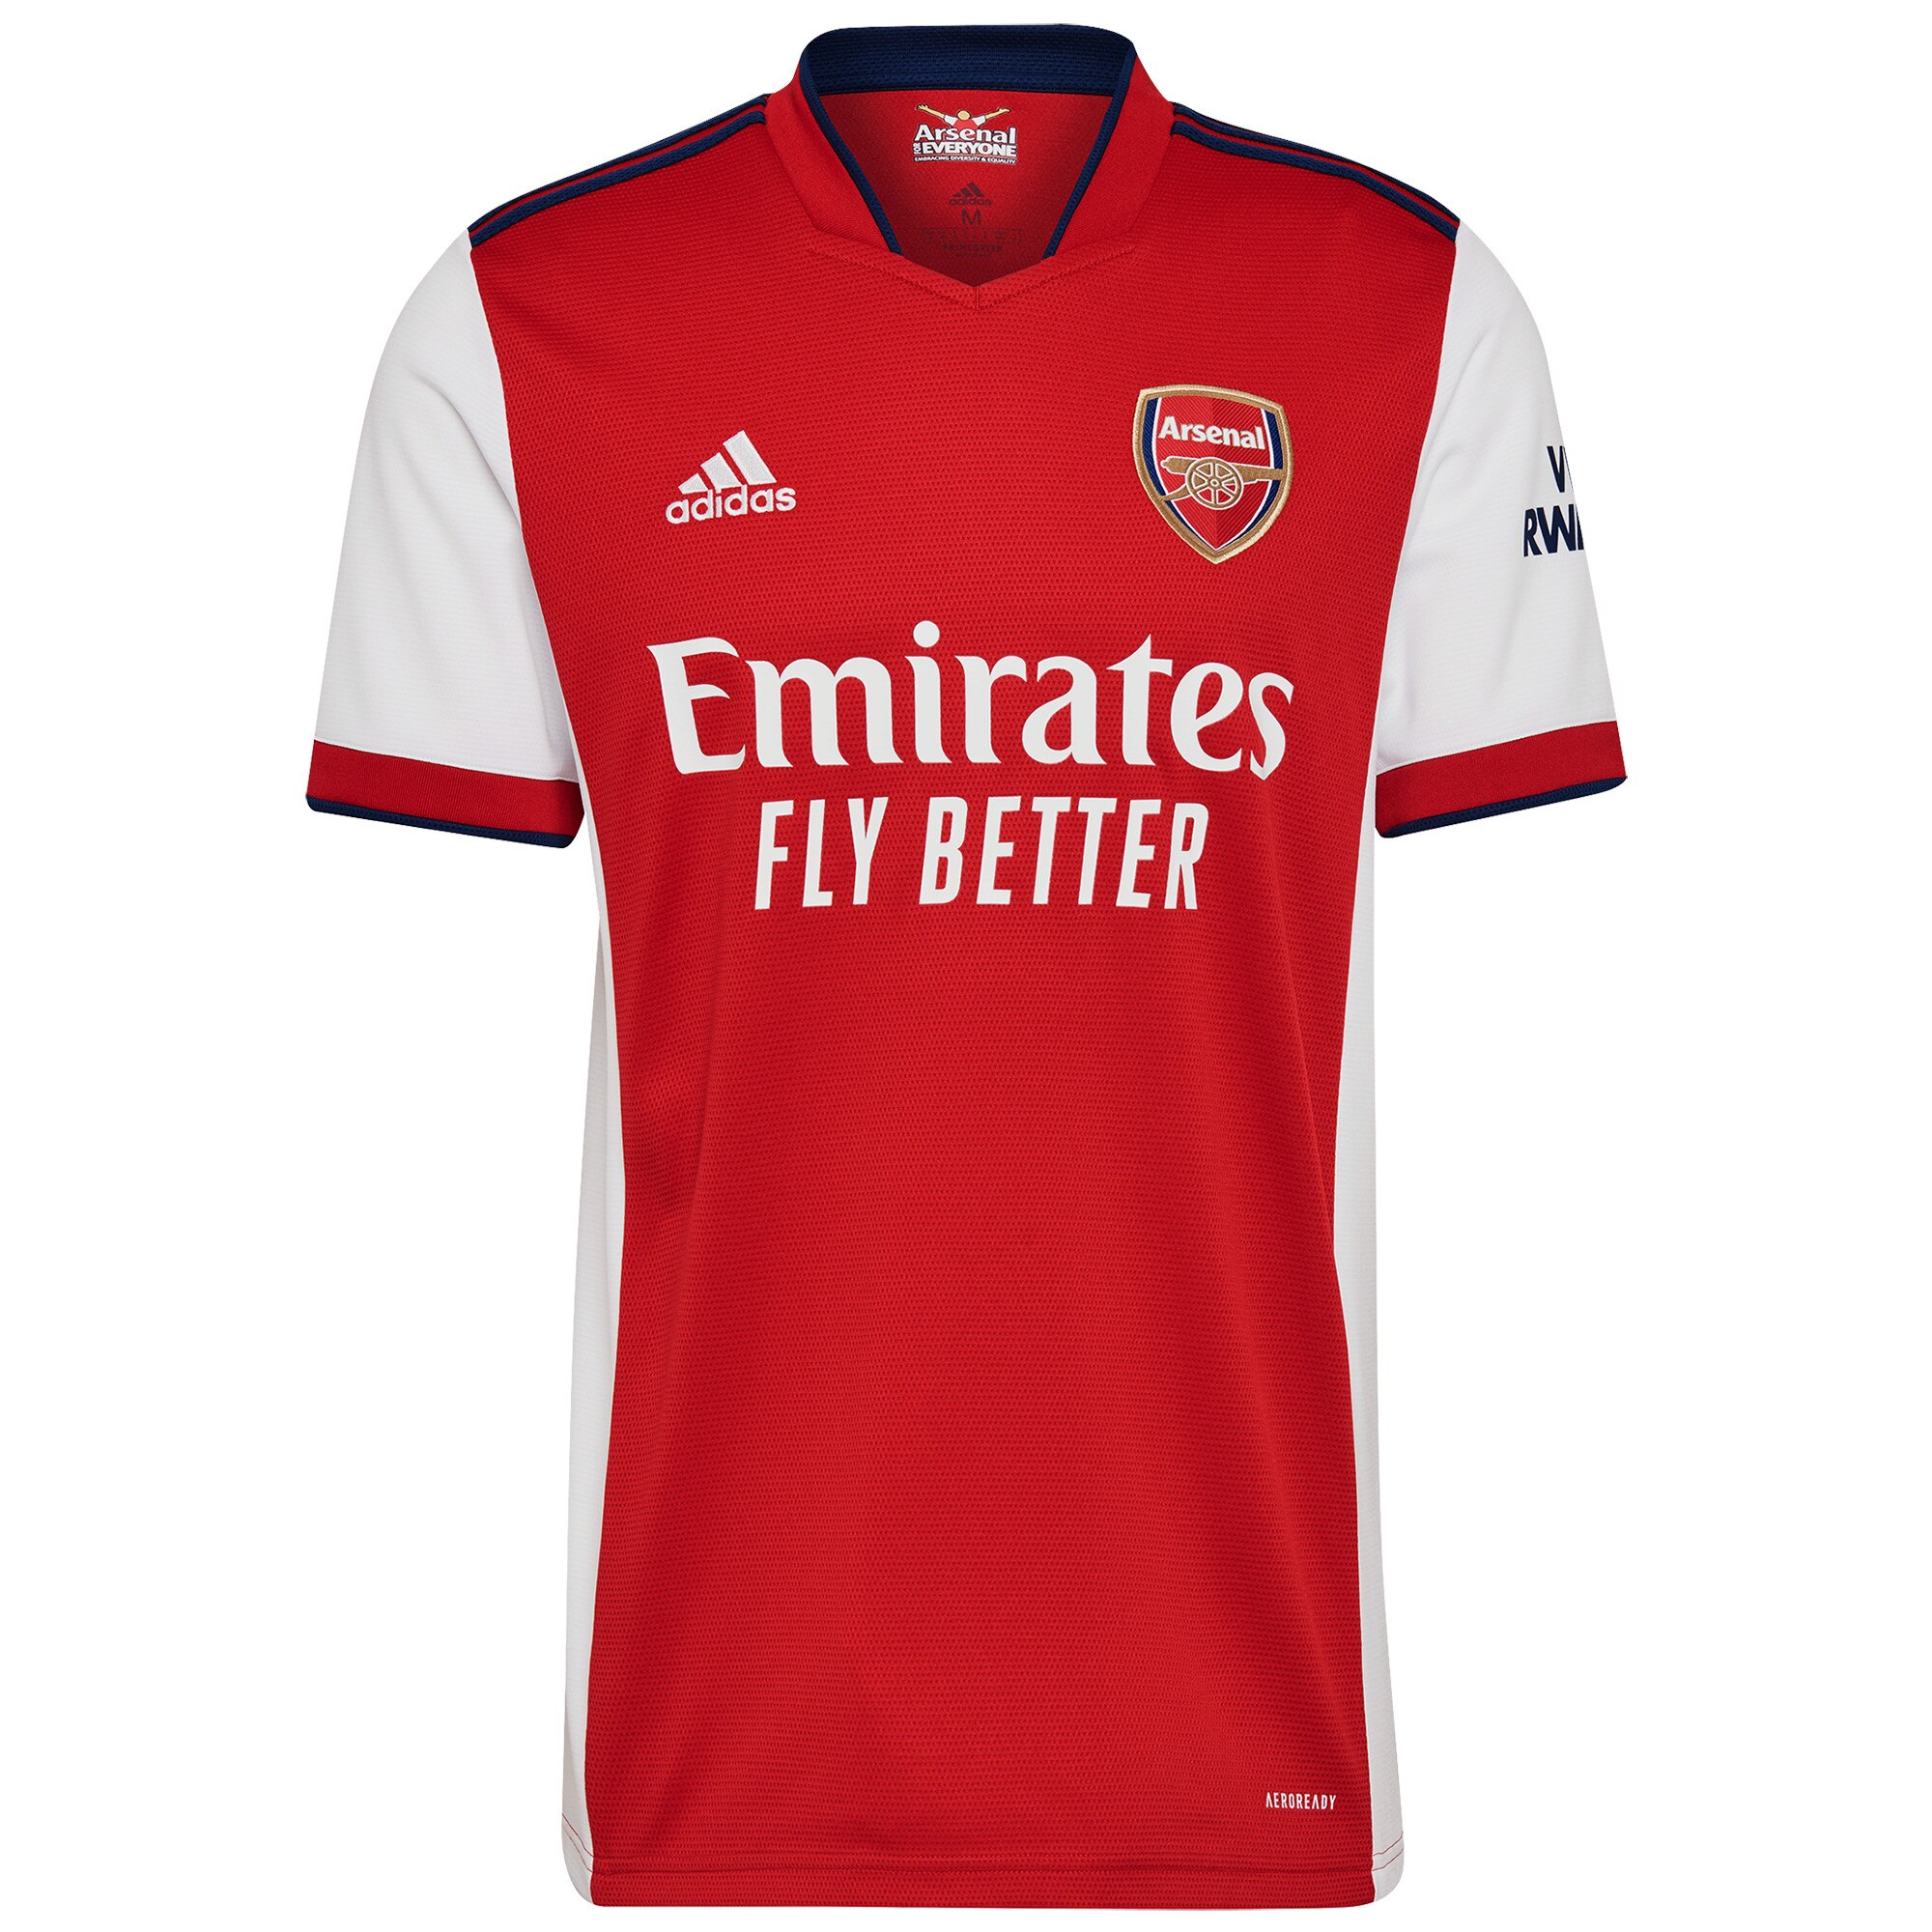 Arsenal Home Shirt 2021-22 with Tierney 3 printing